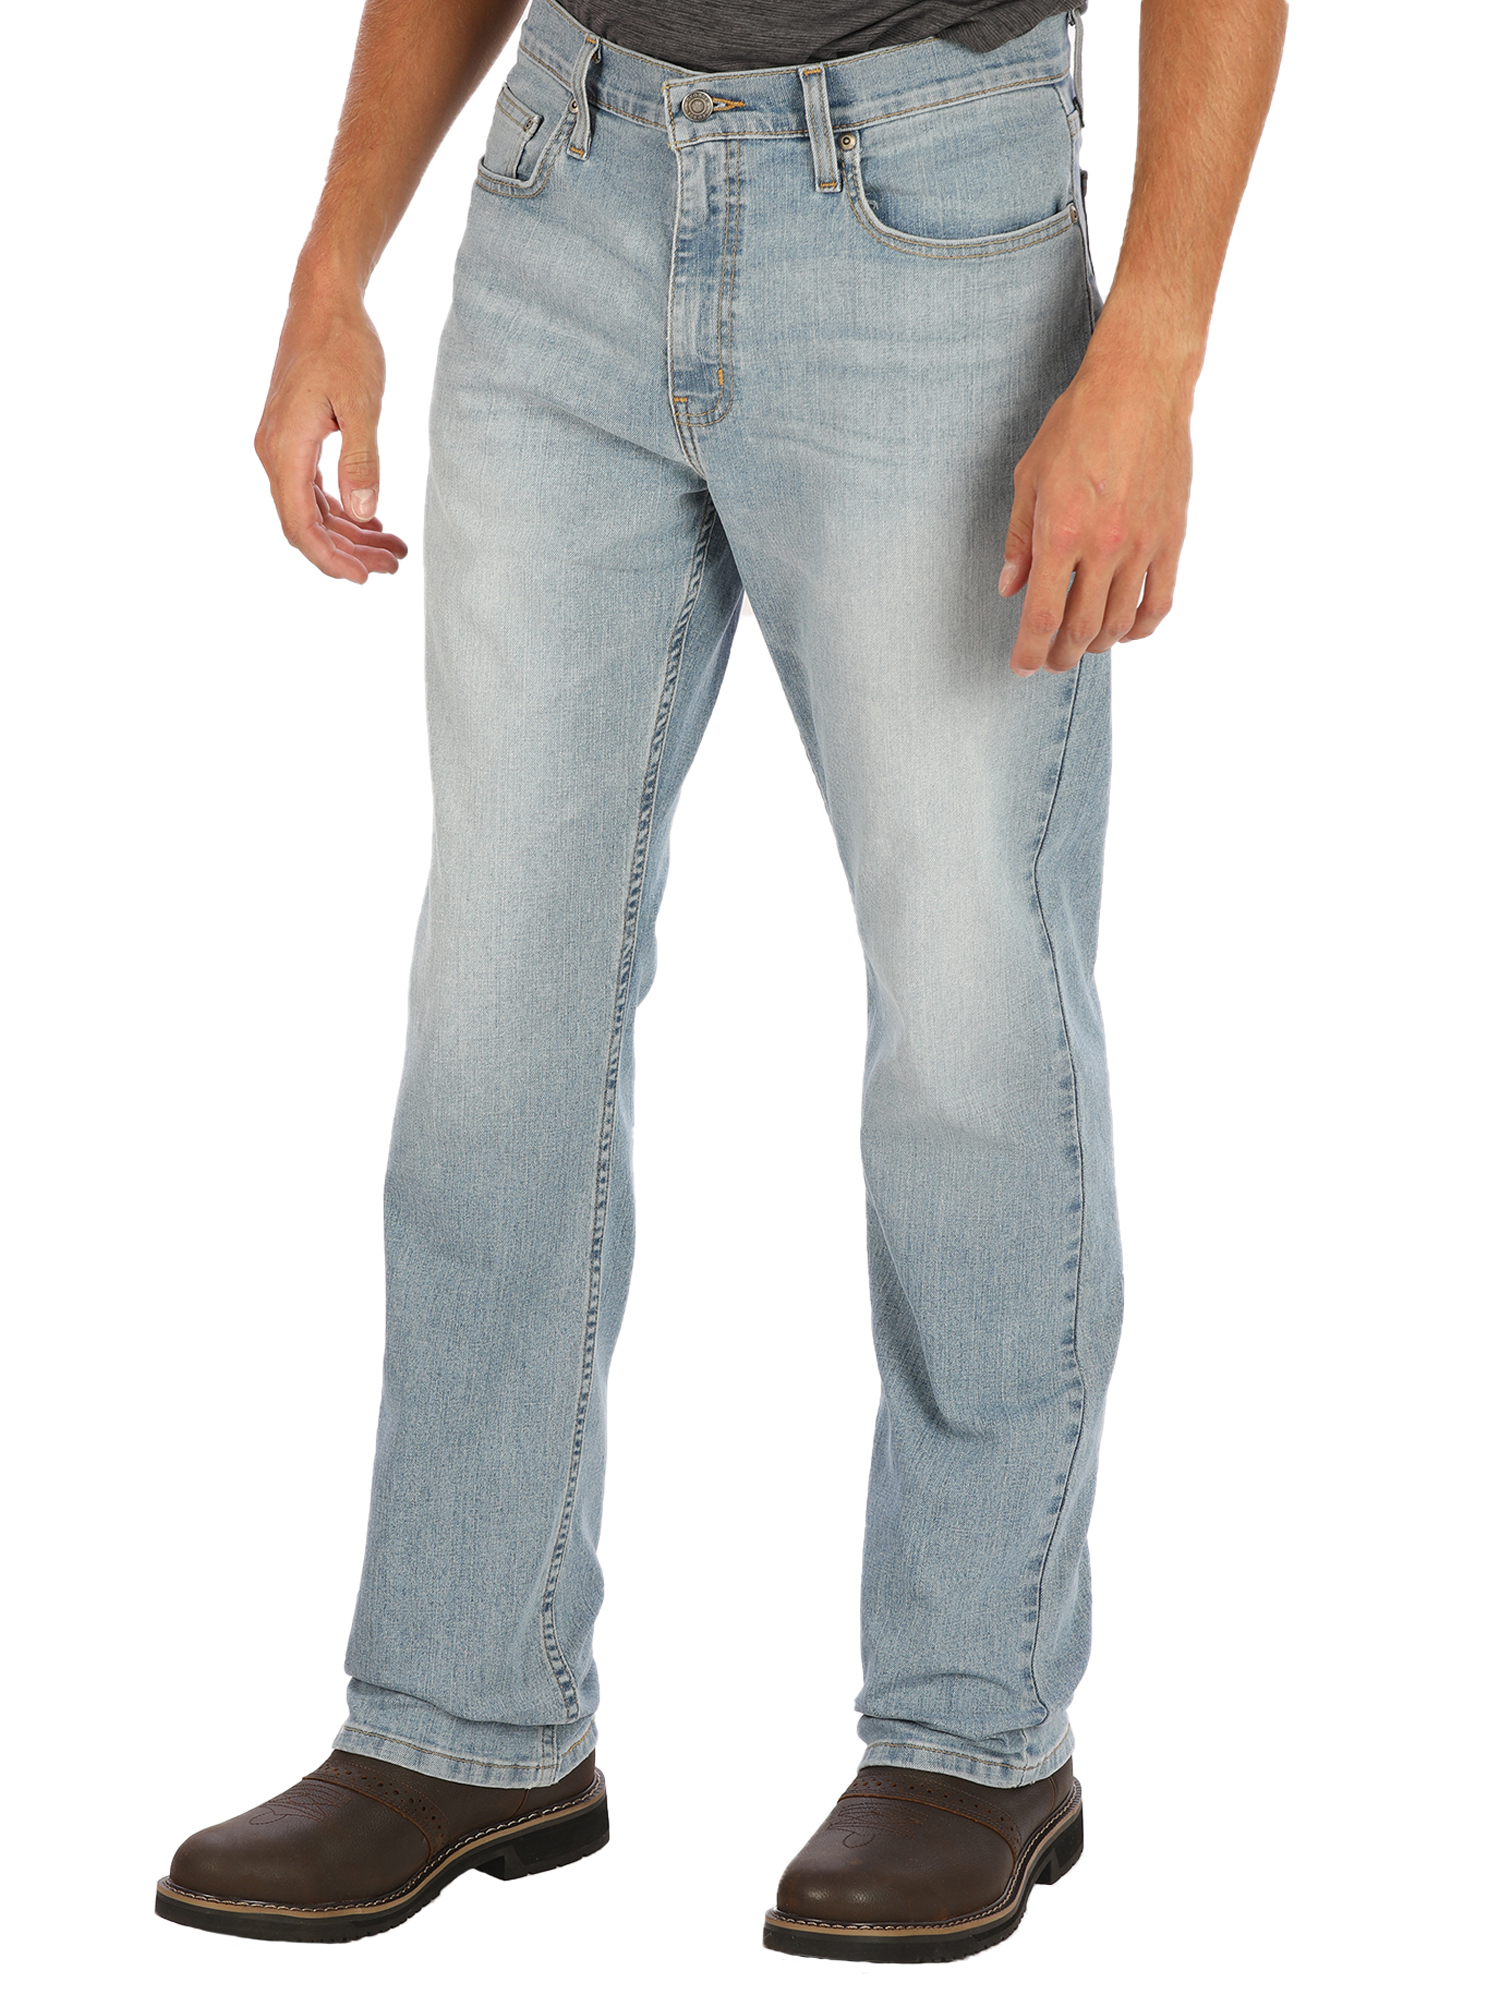 George Men's Bootcut Jeans - image 1 of 5